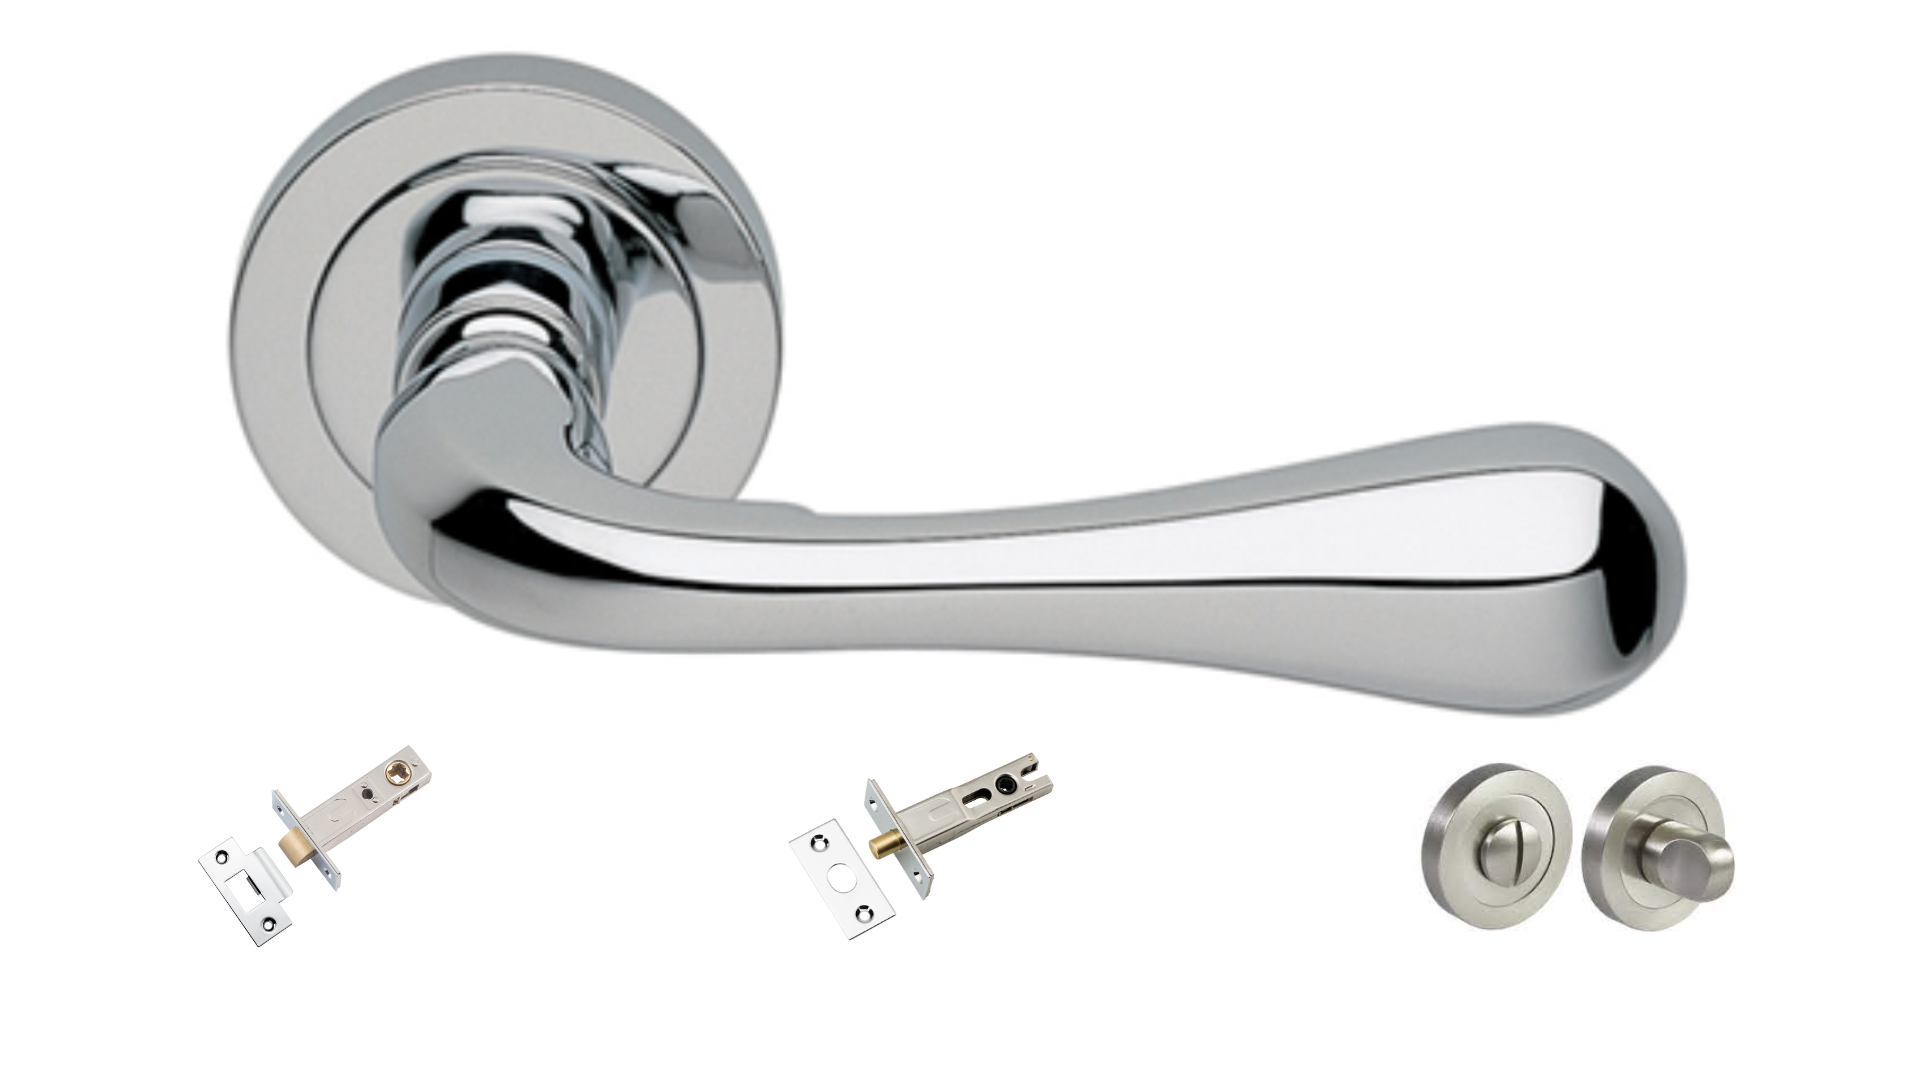 Product picture of the Astro Polished Chrome Door Handle with accessories tubular latch, privacy turn and release, and a privacy bolt on a white background.